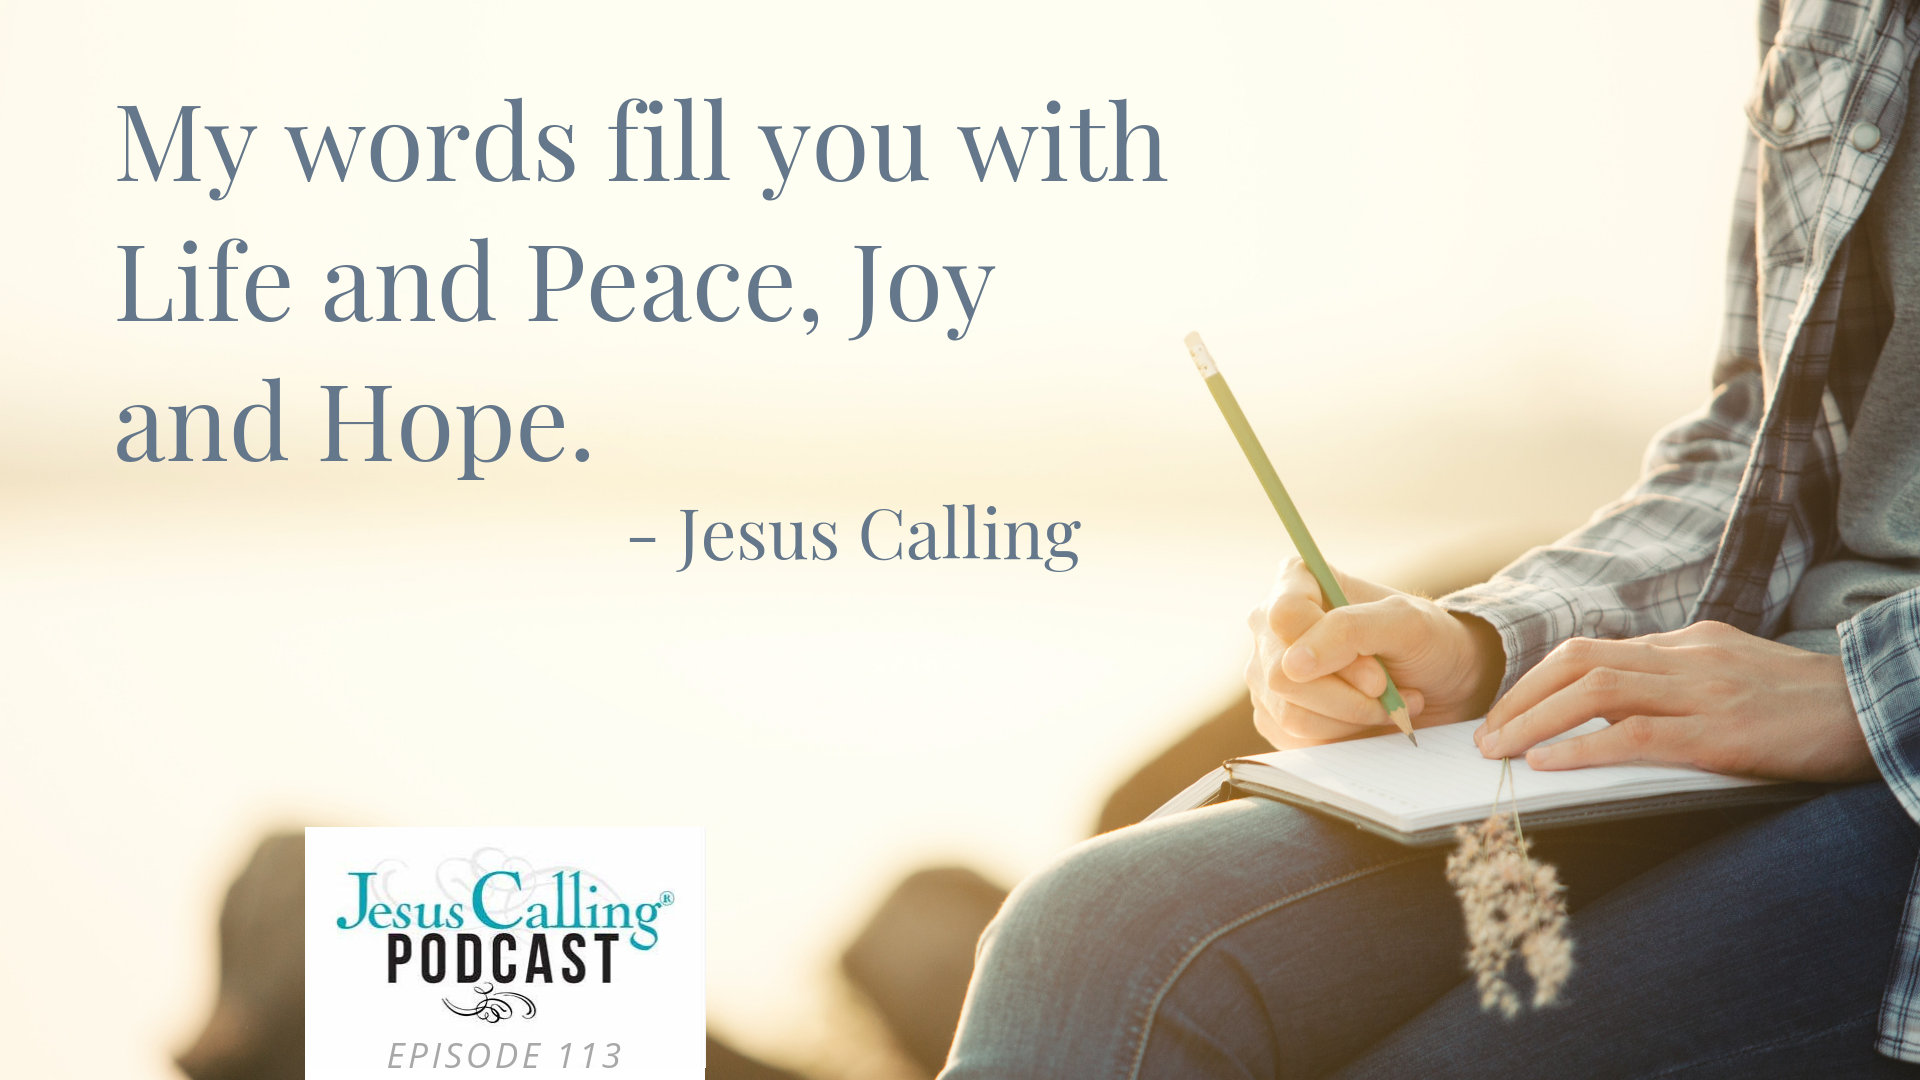 Jesus Calling podcast episode #113 featuring Country Music's RAELYNN and Christian fiction author, Kristy Cambron